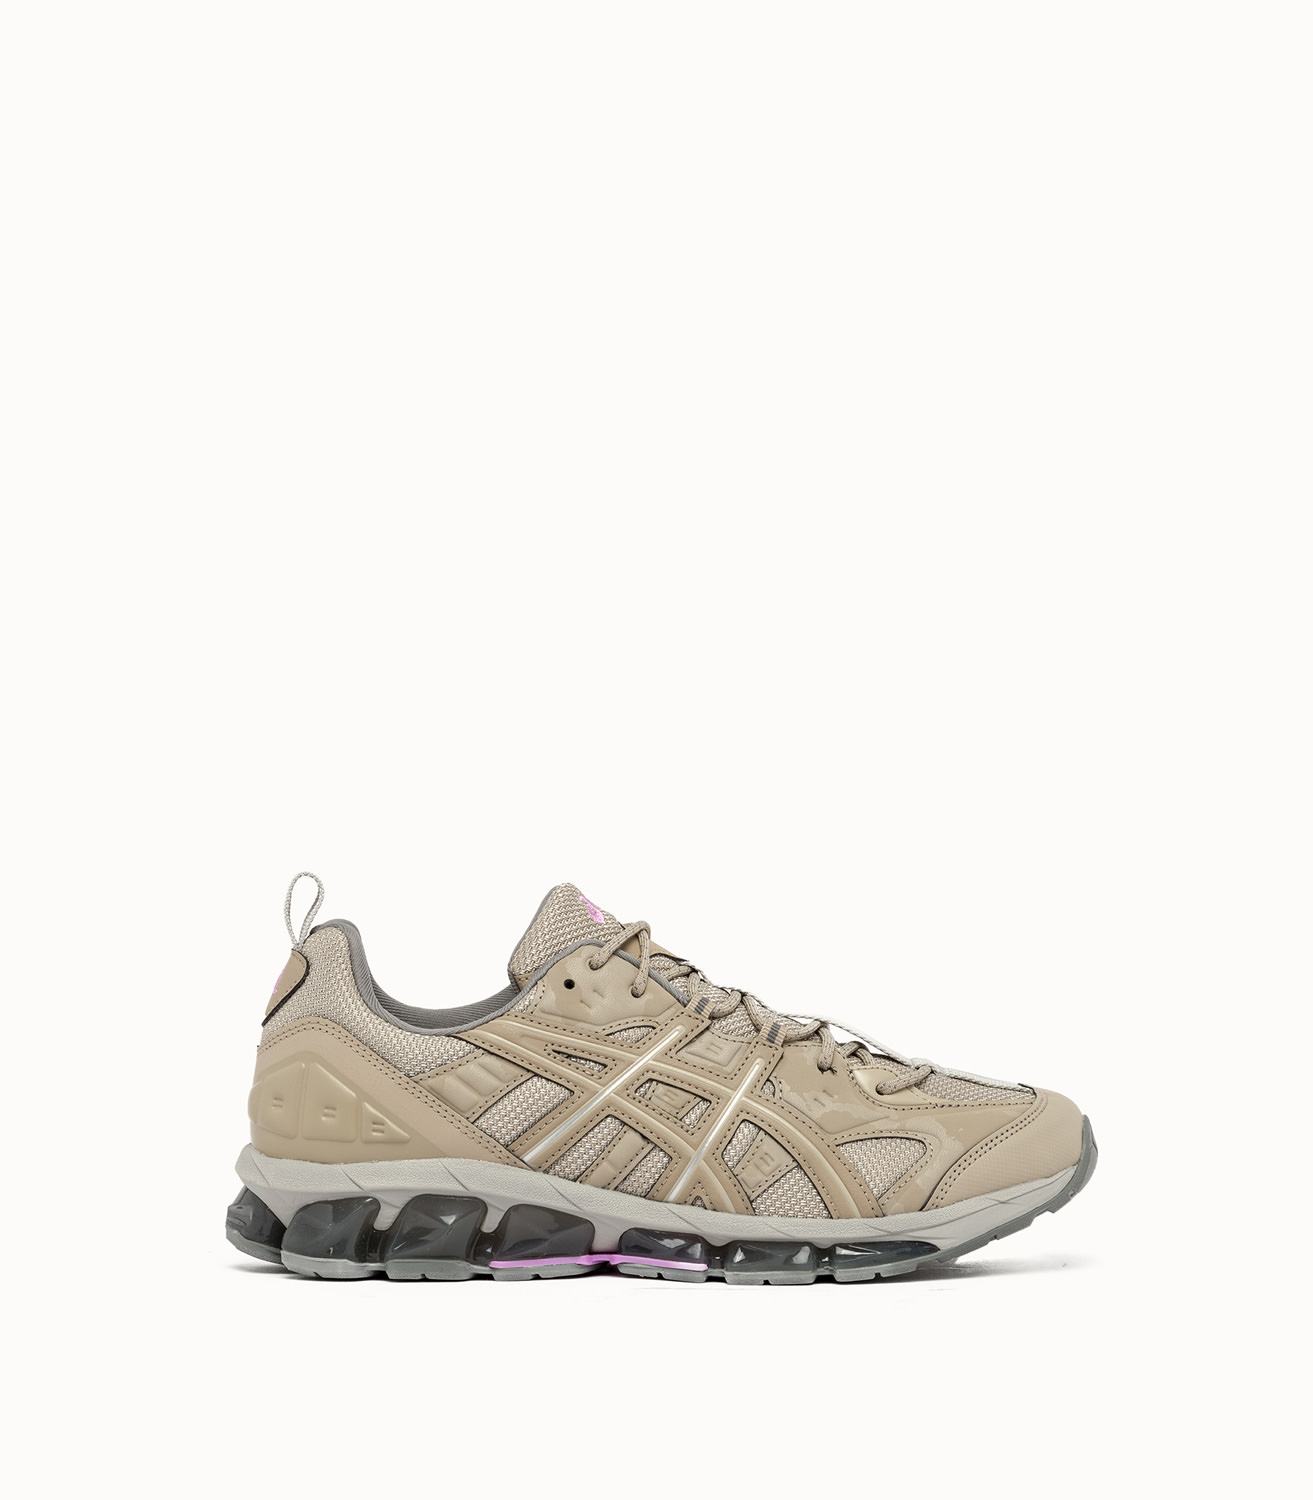 ASICS 360 VII KISO SNEAKERS COLOR BEIGE Playground